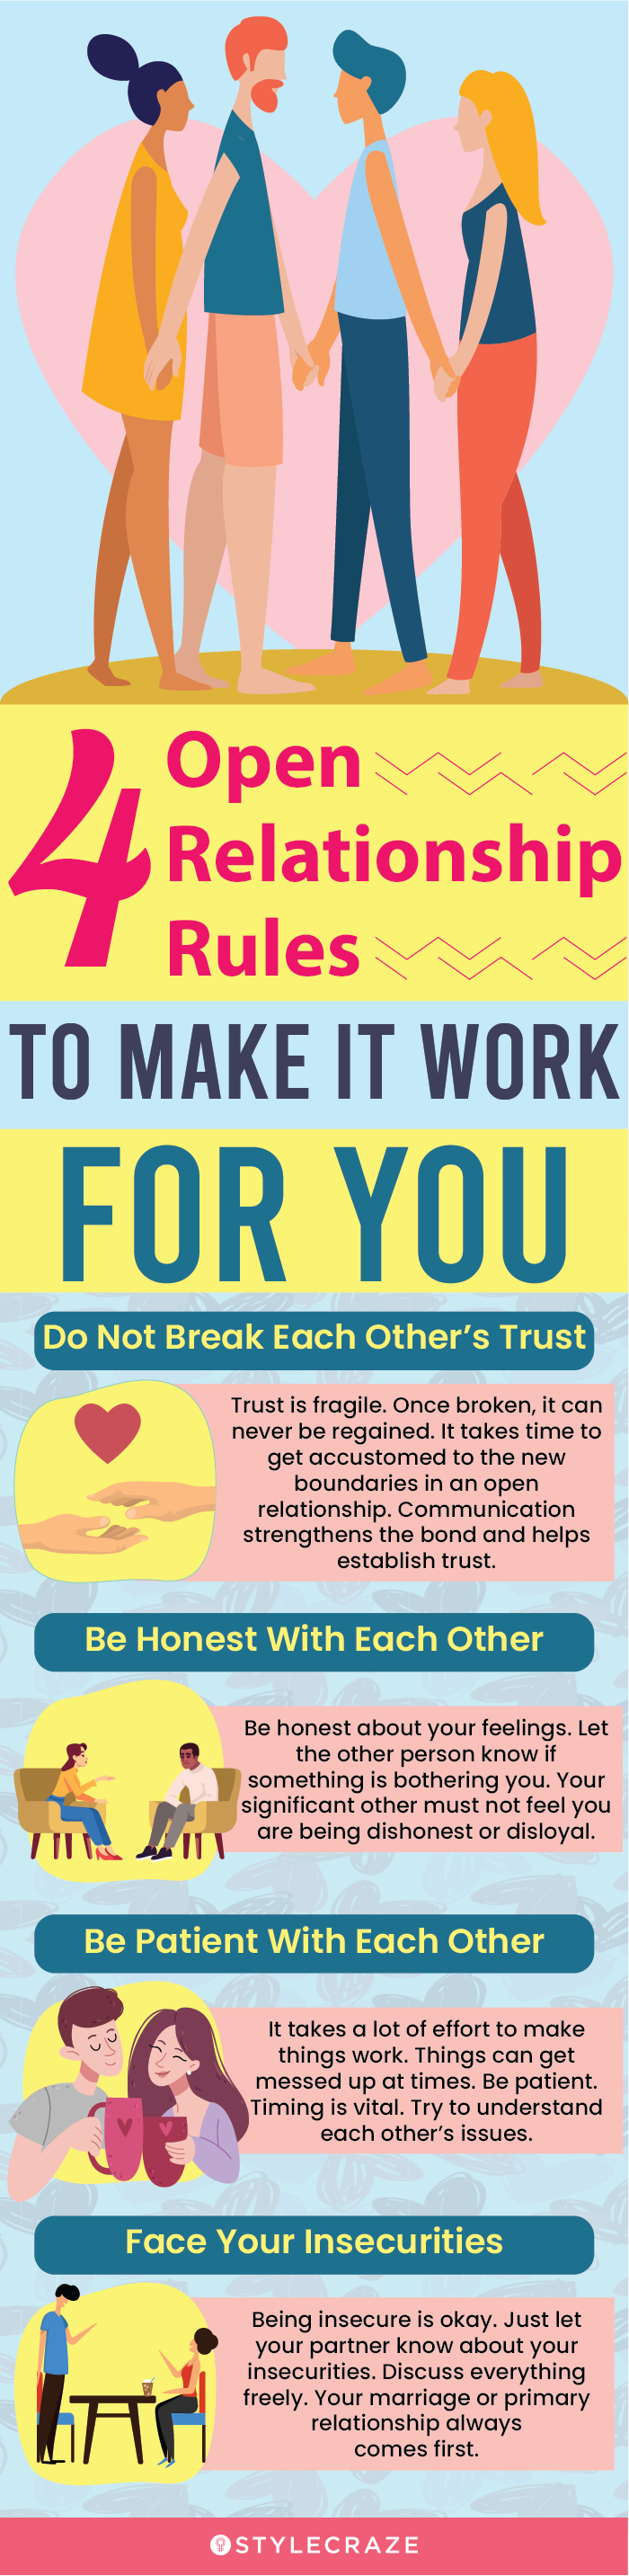 4 open relationship rules to make it work for you (infographic)